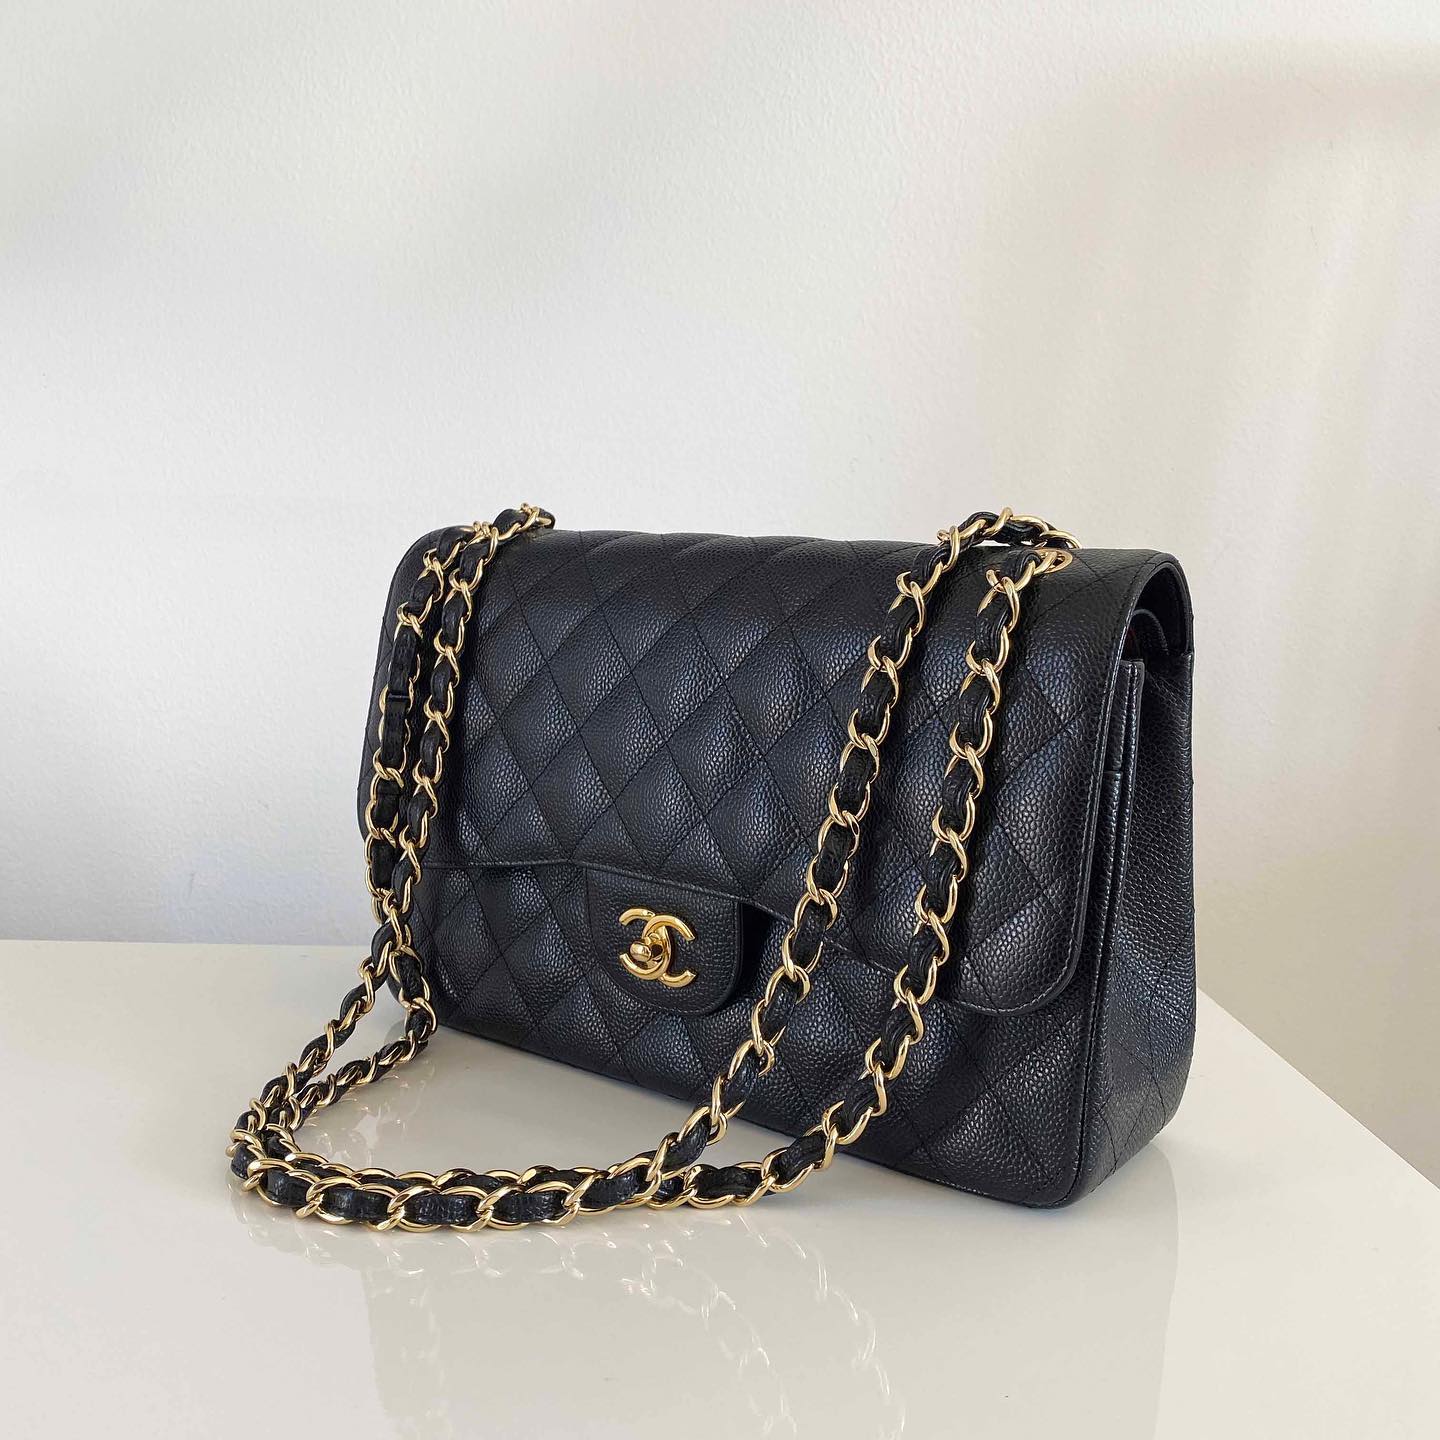 A Timeline of Classic Chanel Bag Price Increases Over The Years - BOPF | Business of Preloved Fashion